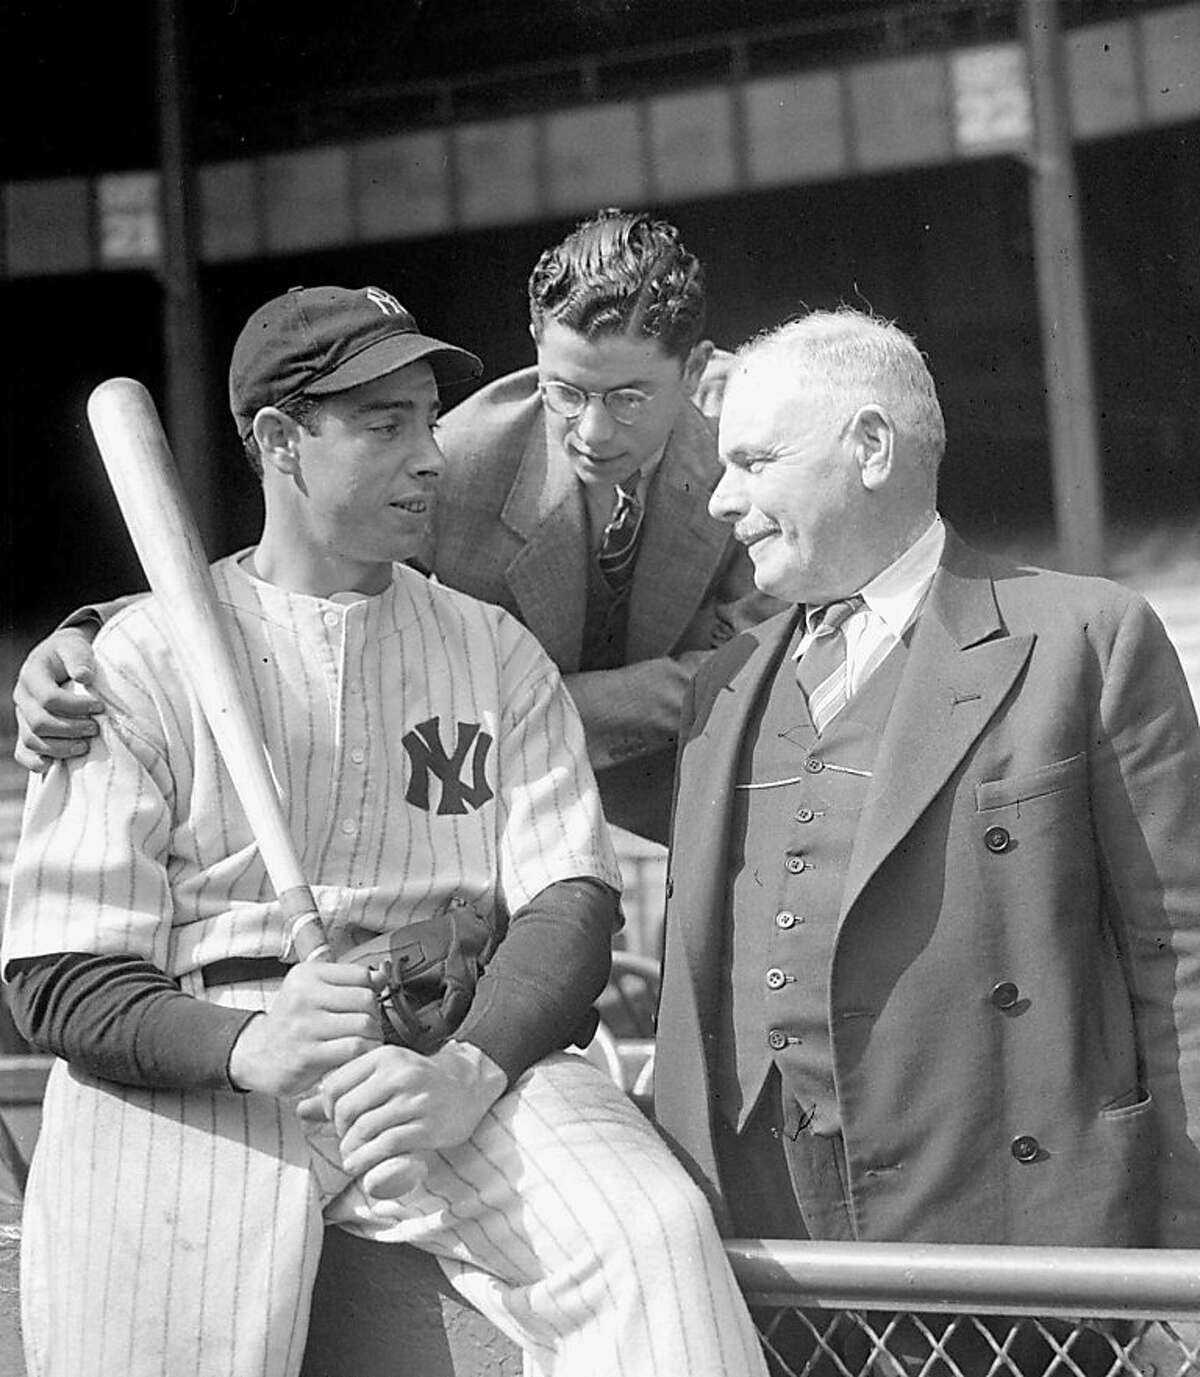 FILE--Joe DiMaggio, New York Yankees center fielder and 1937 home run hitting champ of major league baseball, has the moral support of his brother, Dominic DiMaggio, center, and his father, Joe DiMaggio, Sr., right, for the World Series battle with the New York Giants opening in this Oct. 1937. DiMaggio, the elegant Yankee Clipper whose 56-game hitting streak endures as one of the most remarkable records in baseball or any sport, died Monday, March 8, 1999 at his home in Hollywood, Fla. He was 84.(APPhoto/File ) Ran on: 08-28-2011 In 1936, Dominic DiMaggio (right) decided to try following big brother Joe into pro baseball.